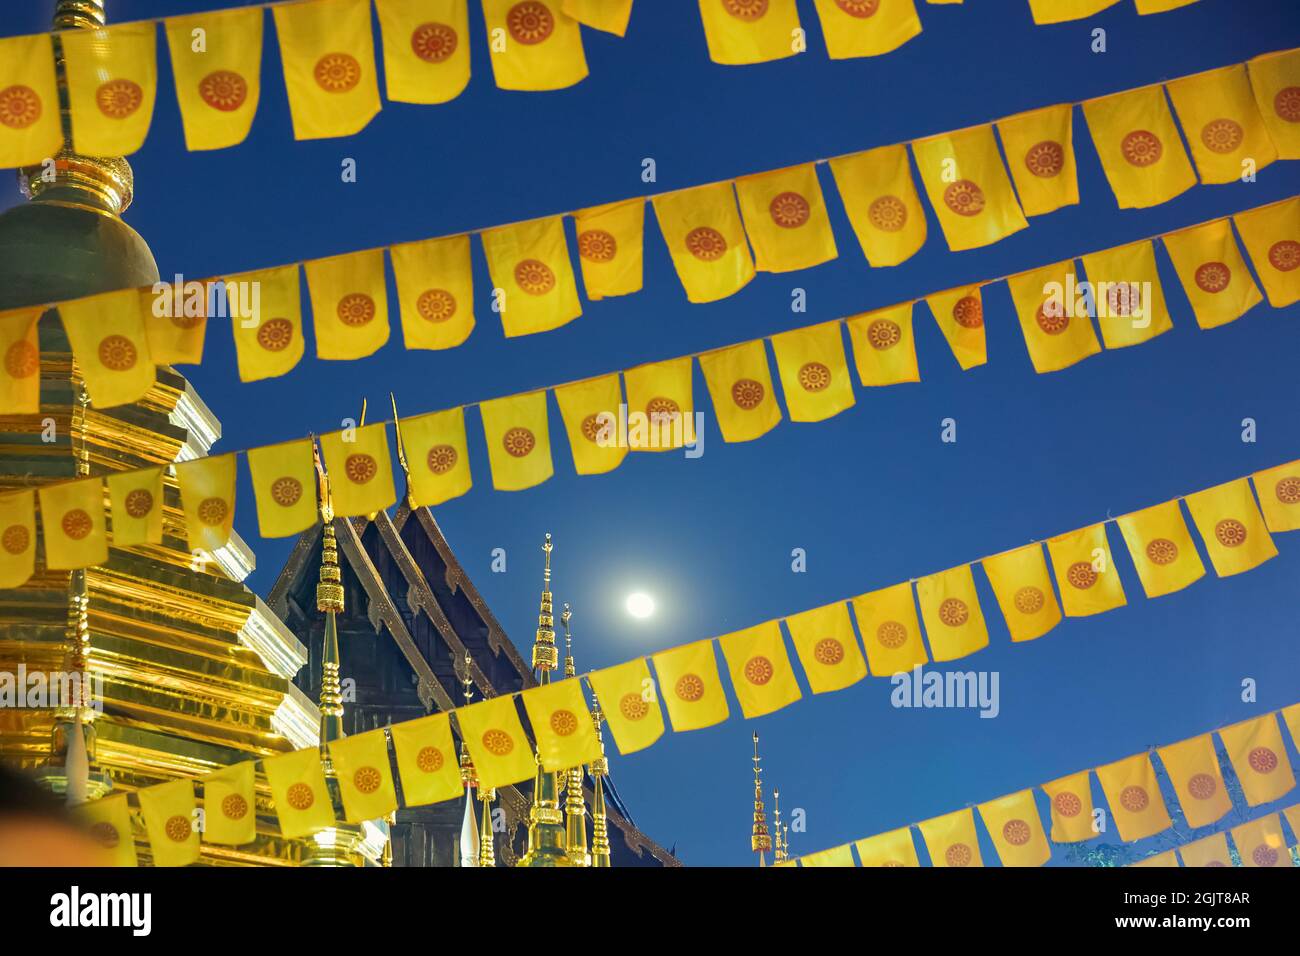 The Dhammachak Flag or Thai Buddhist flag in temple which is used widely in Thailand Stock Photo